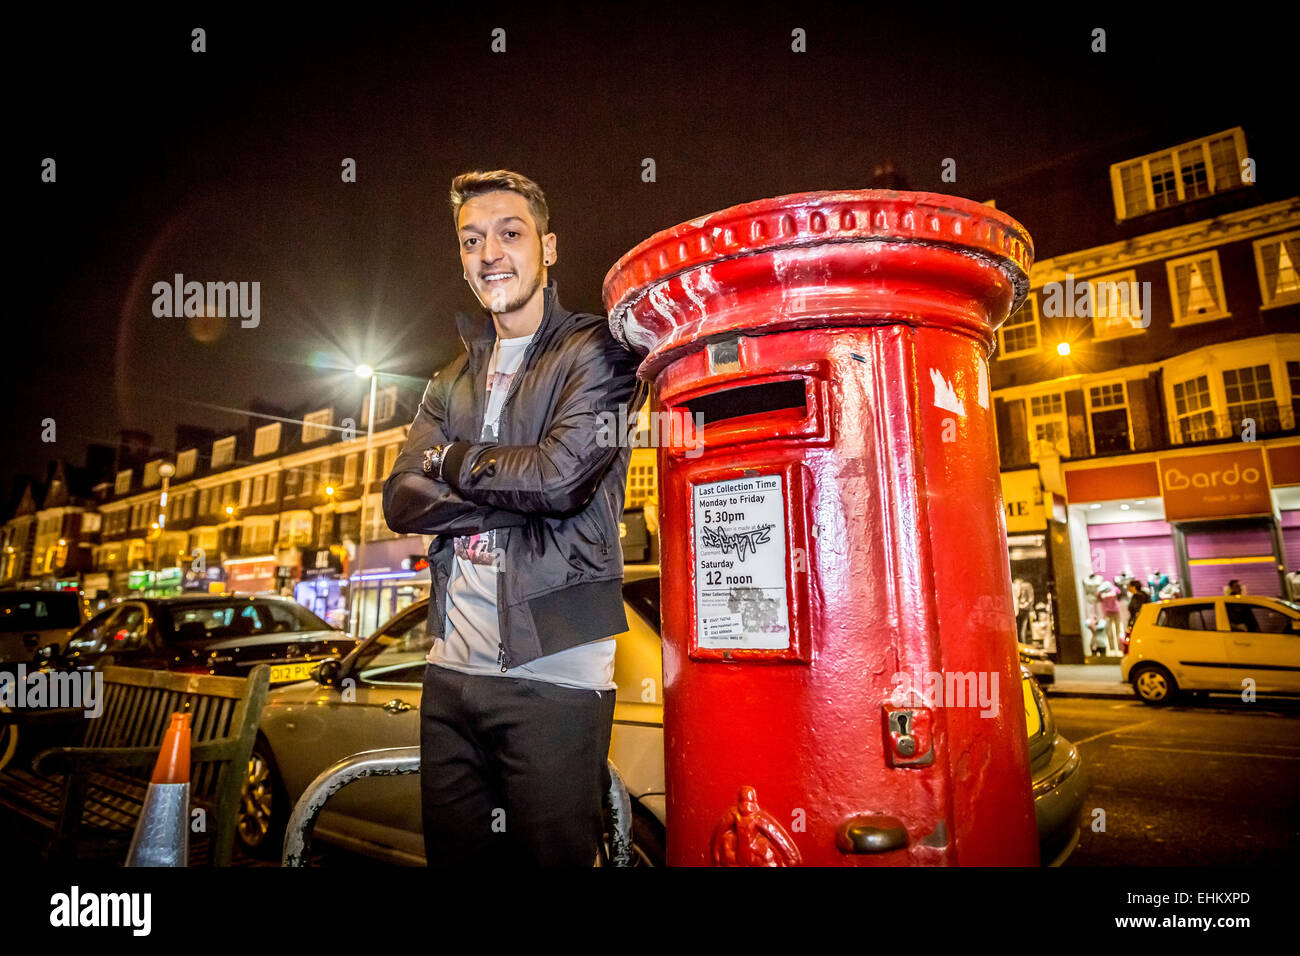 Mesut Özil, German footballer and Arsenal player poses by London red postbox. Stock Photo